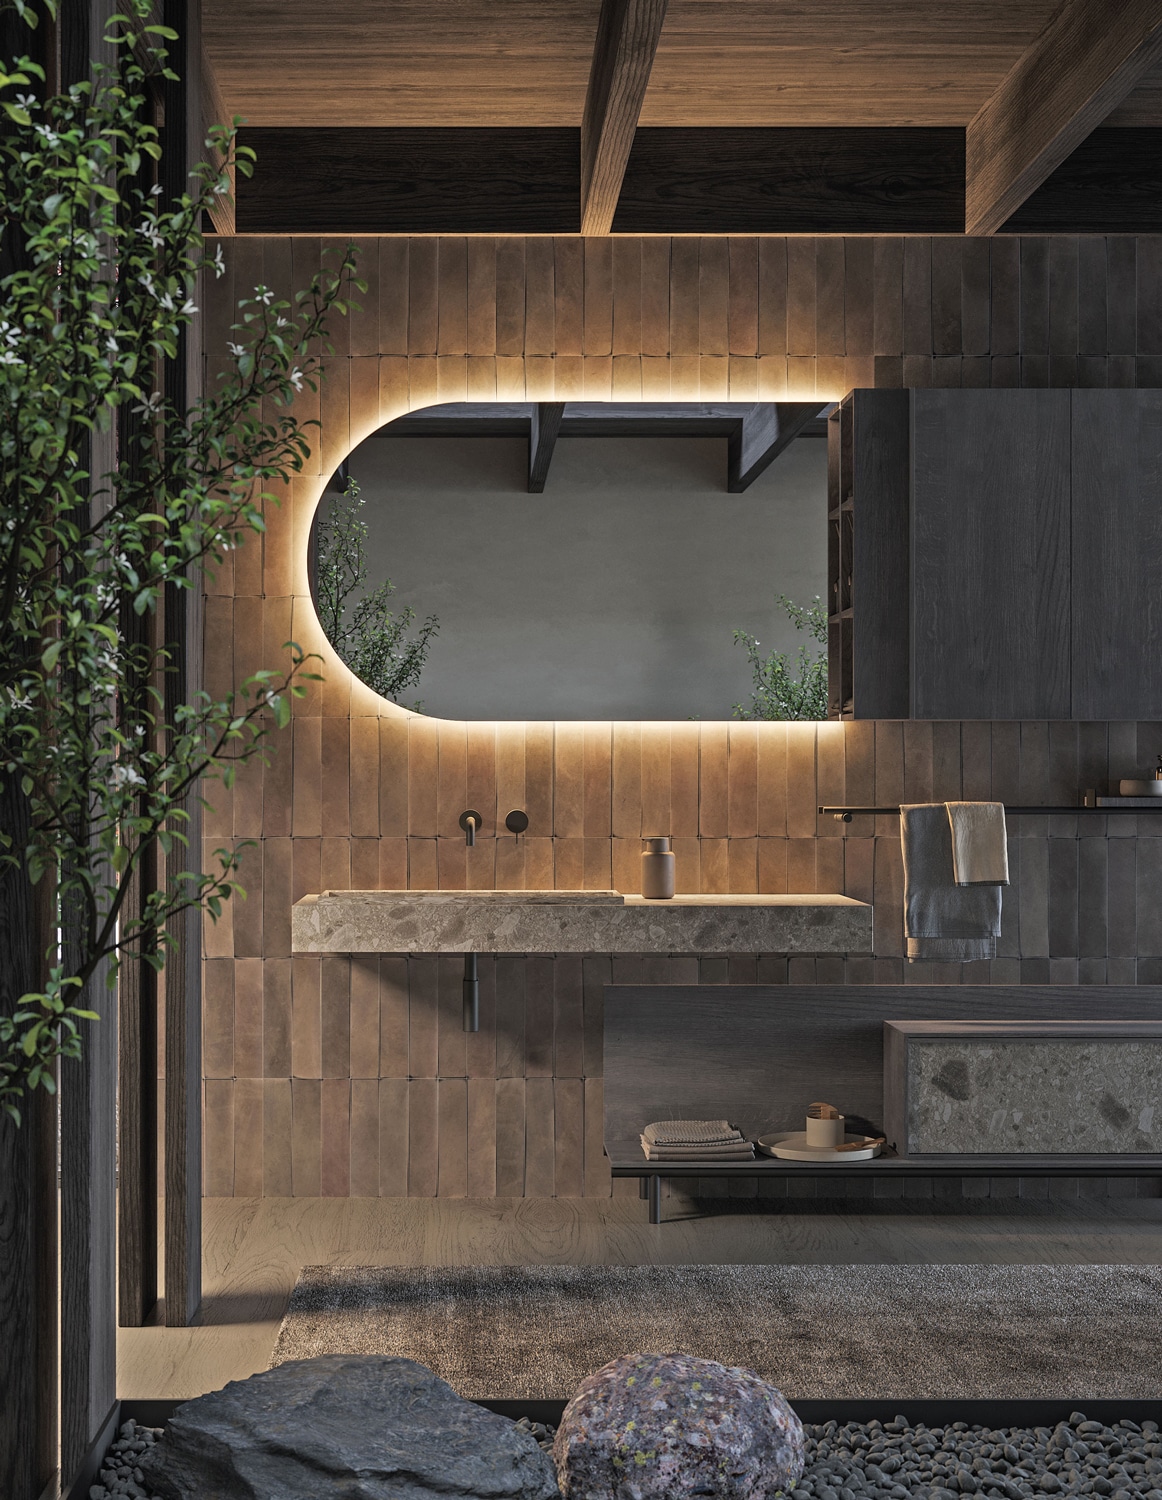 The backlit mirror provides ambient light to make the design even more sophisticated. 